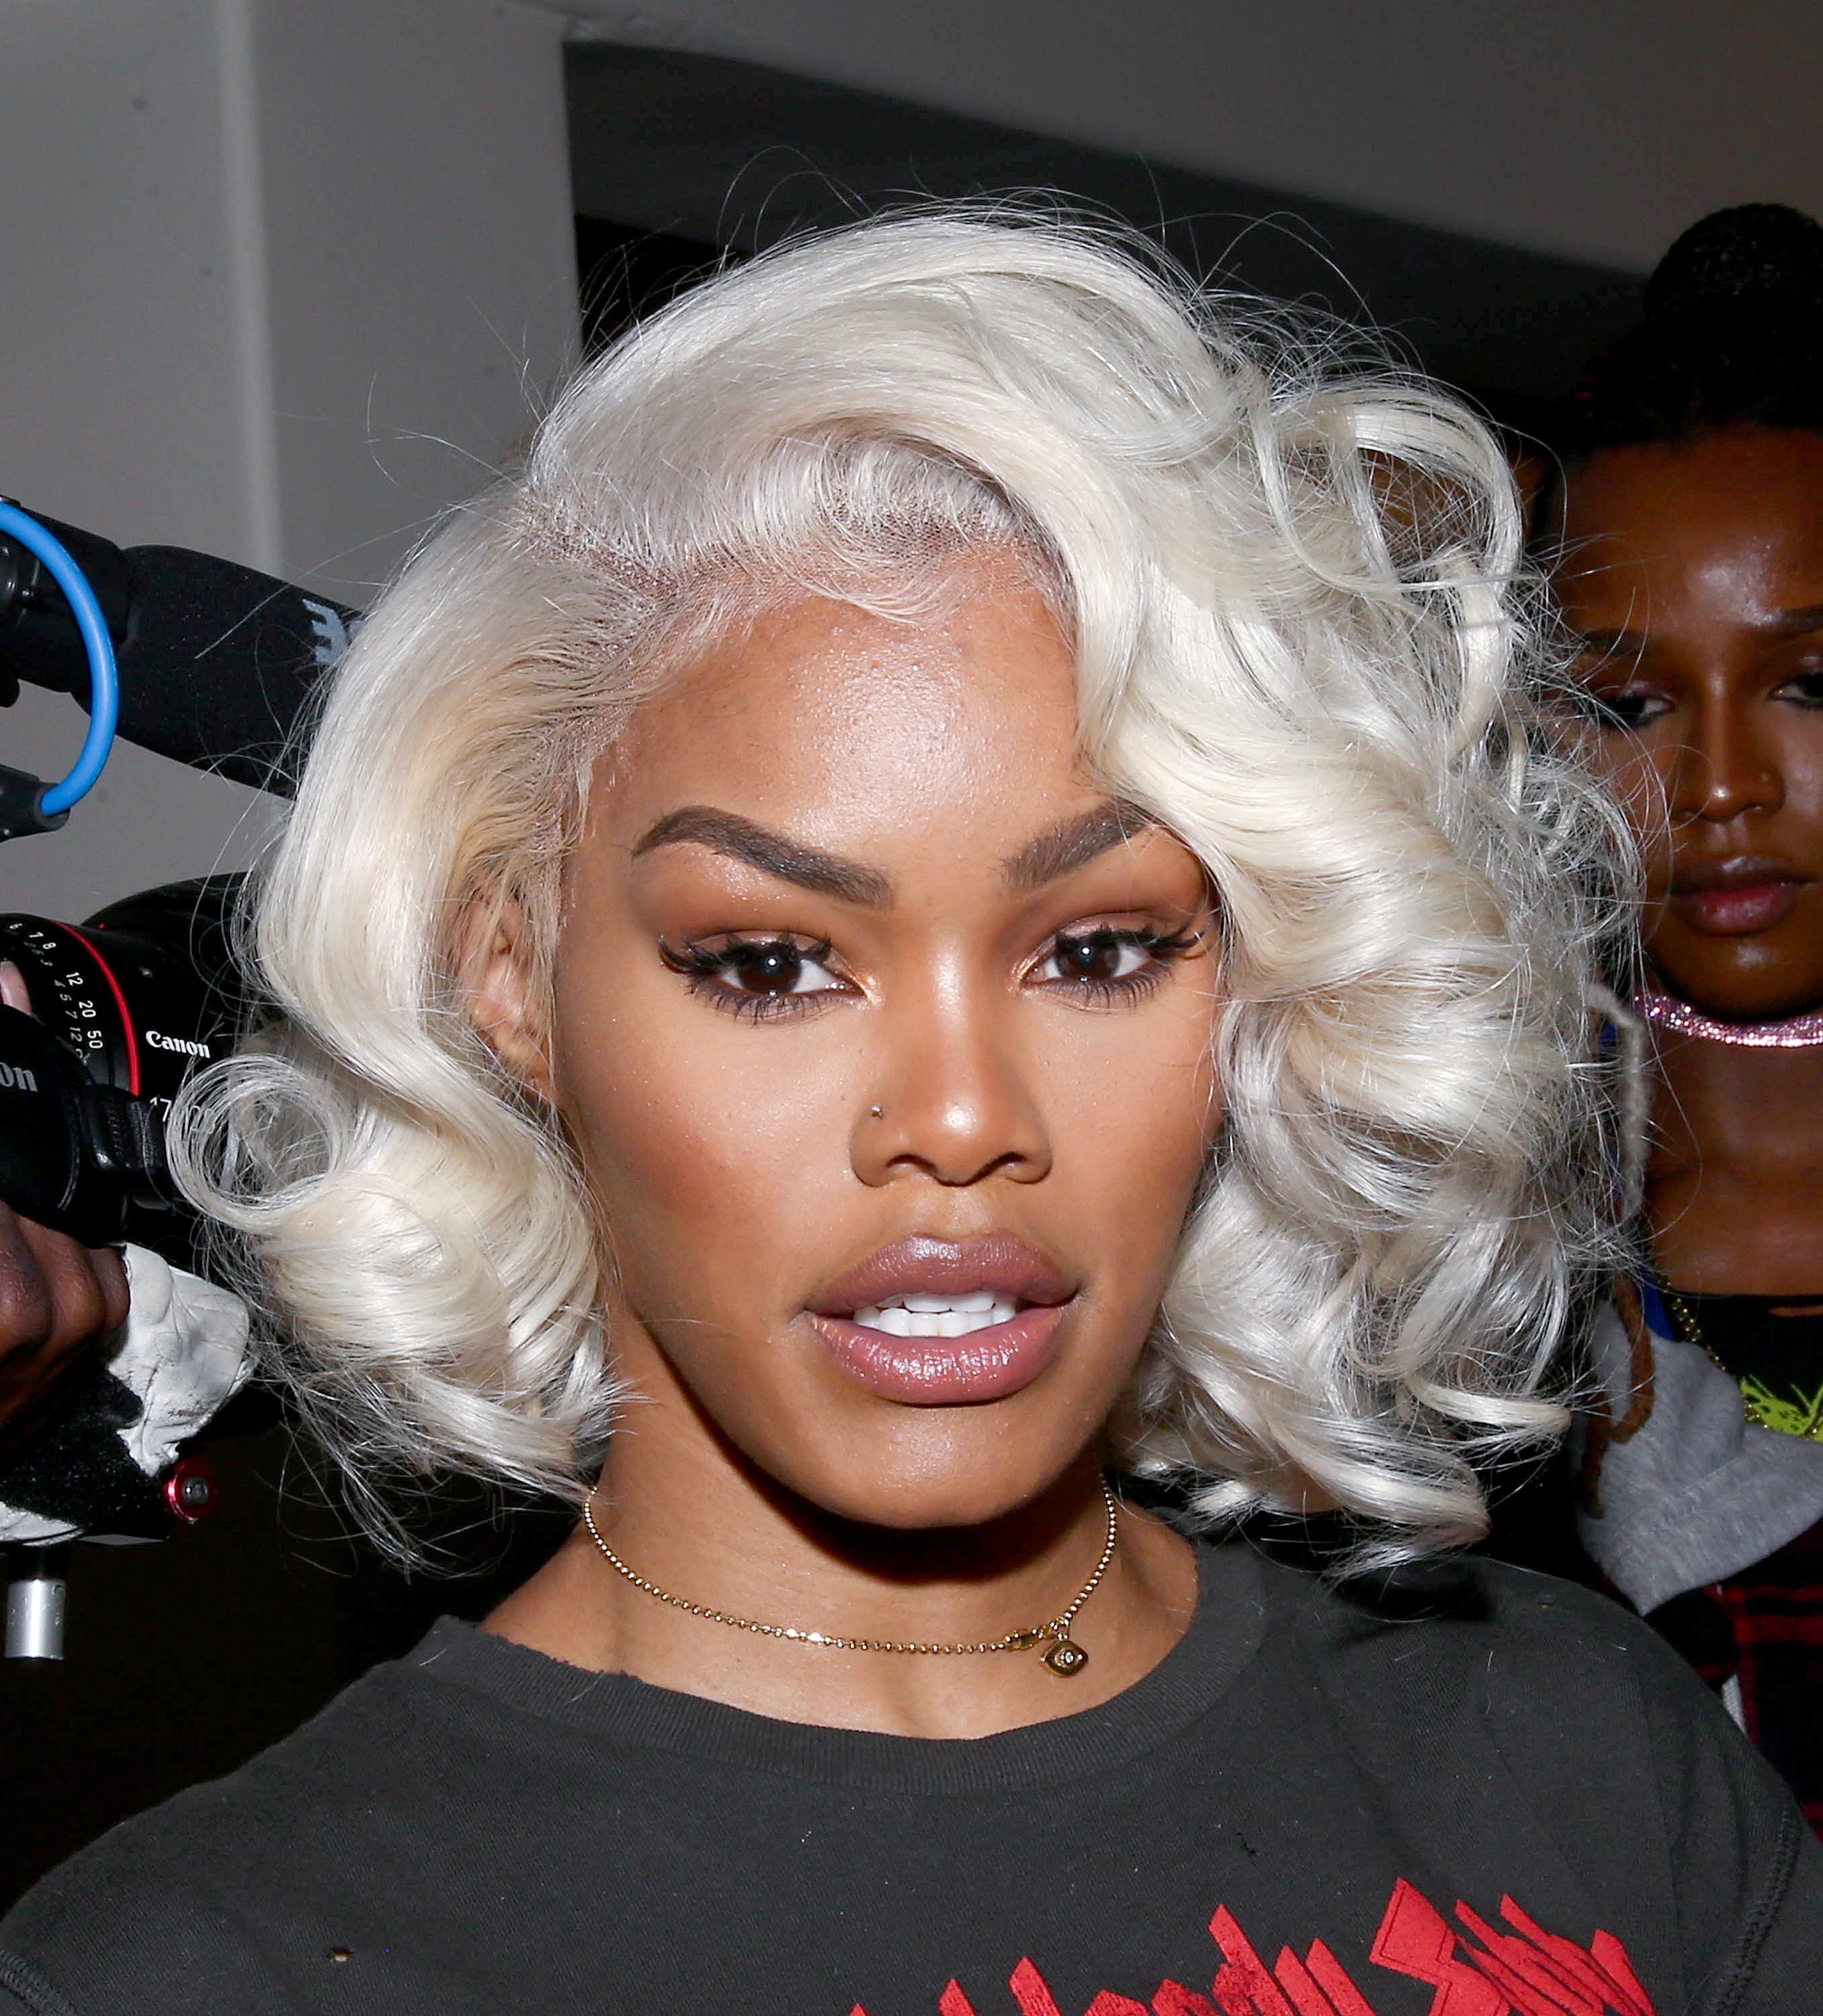 Teyana Taylor Talks Leaving Tour With Jeremih: 'My Name Wasn't Even On The Ticket'